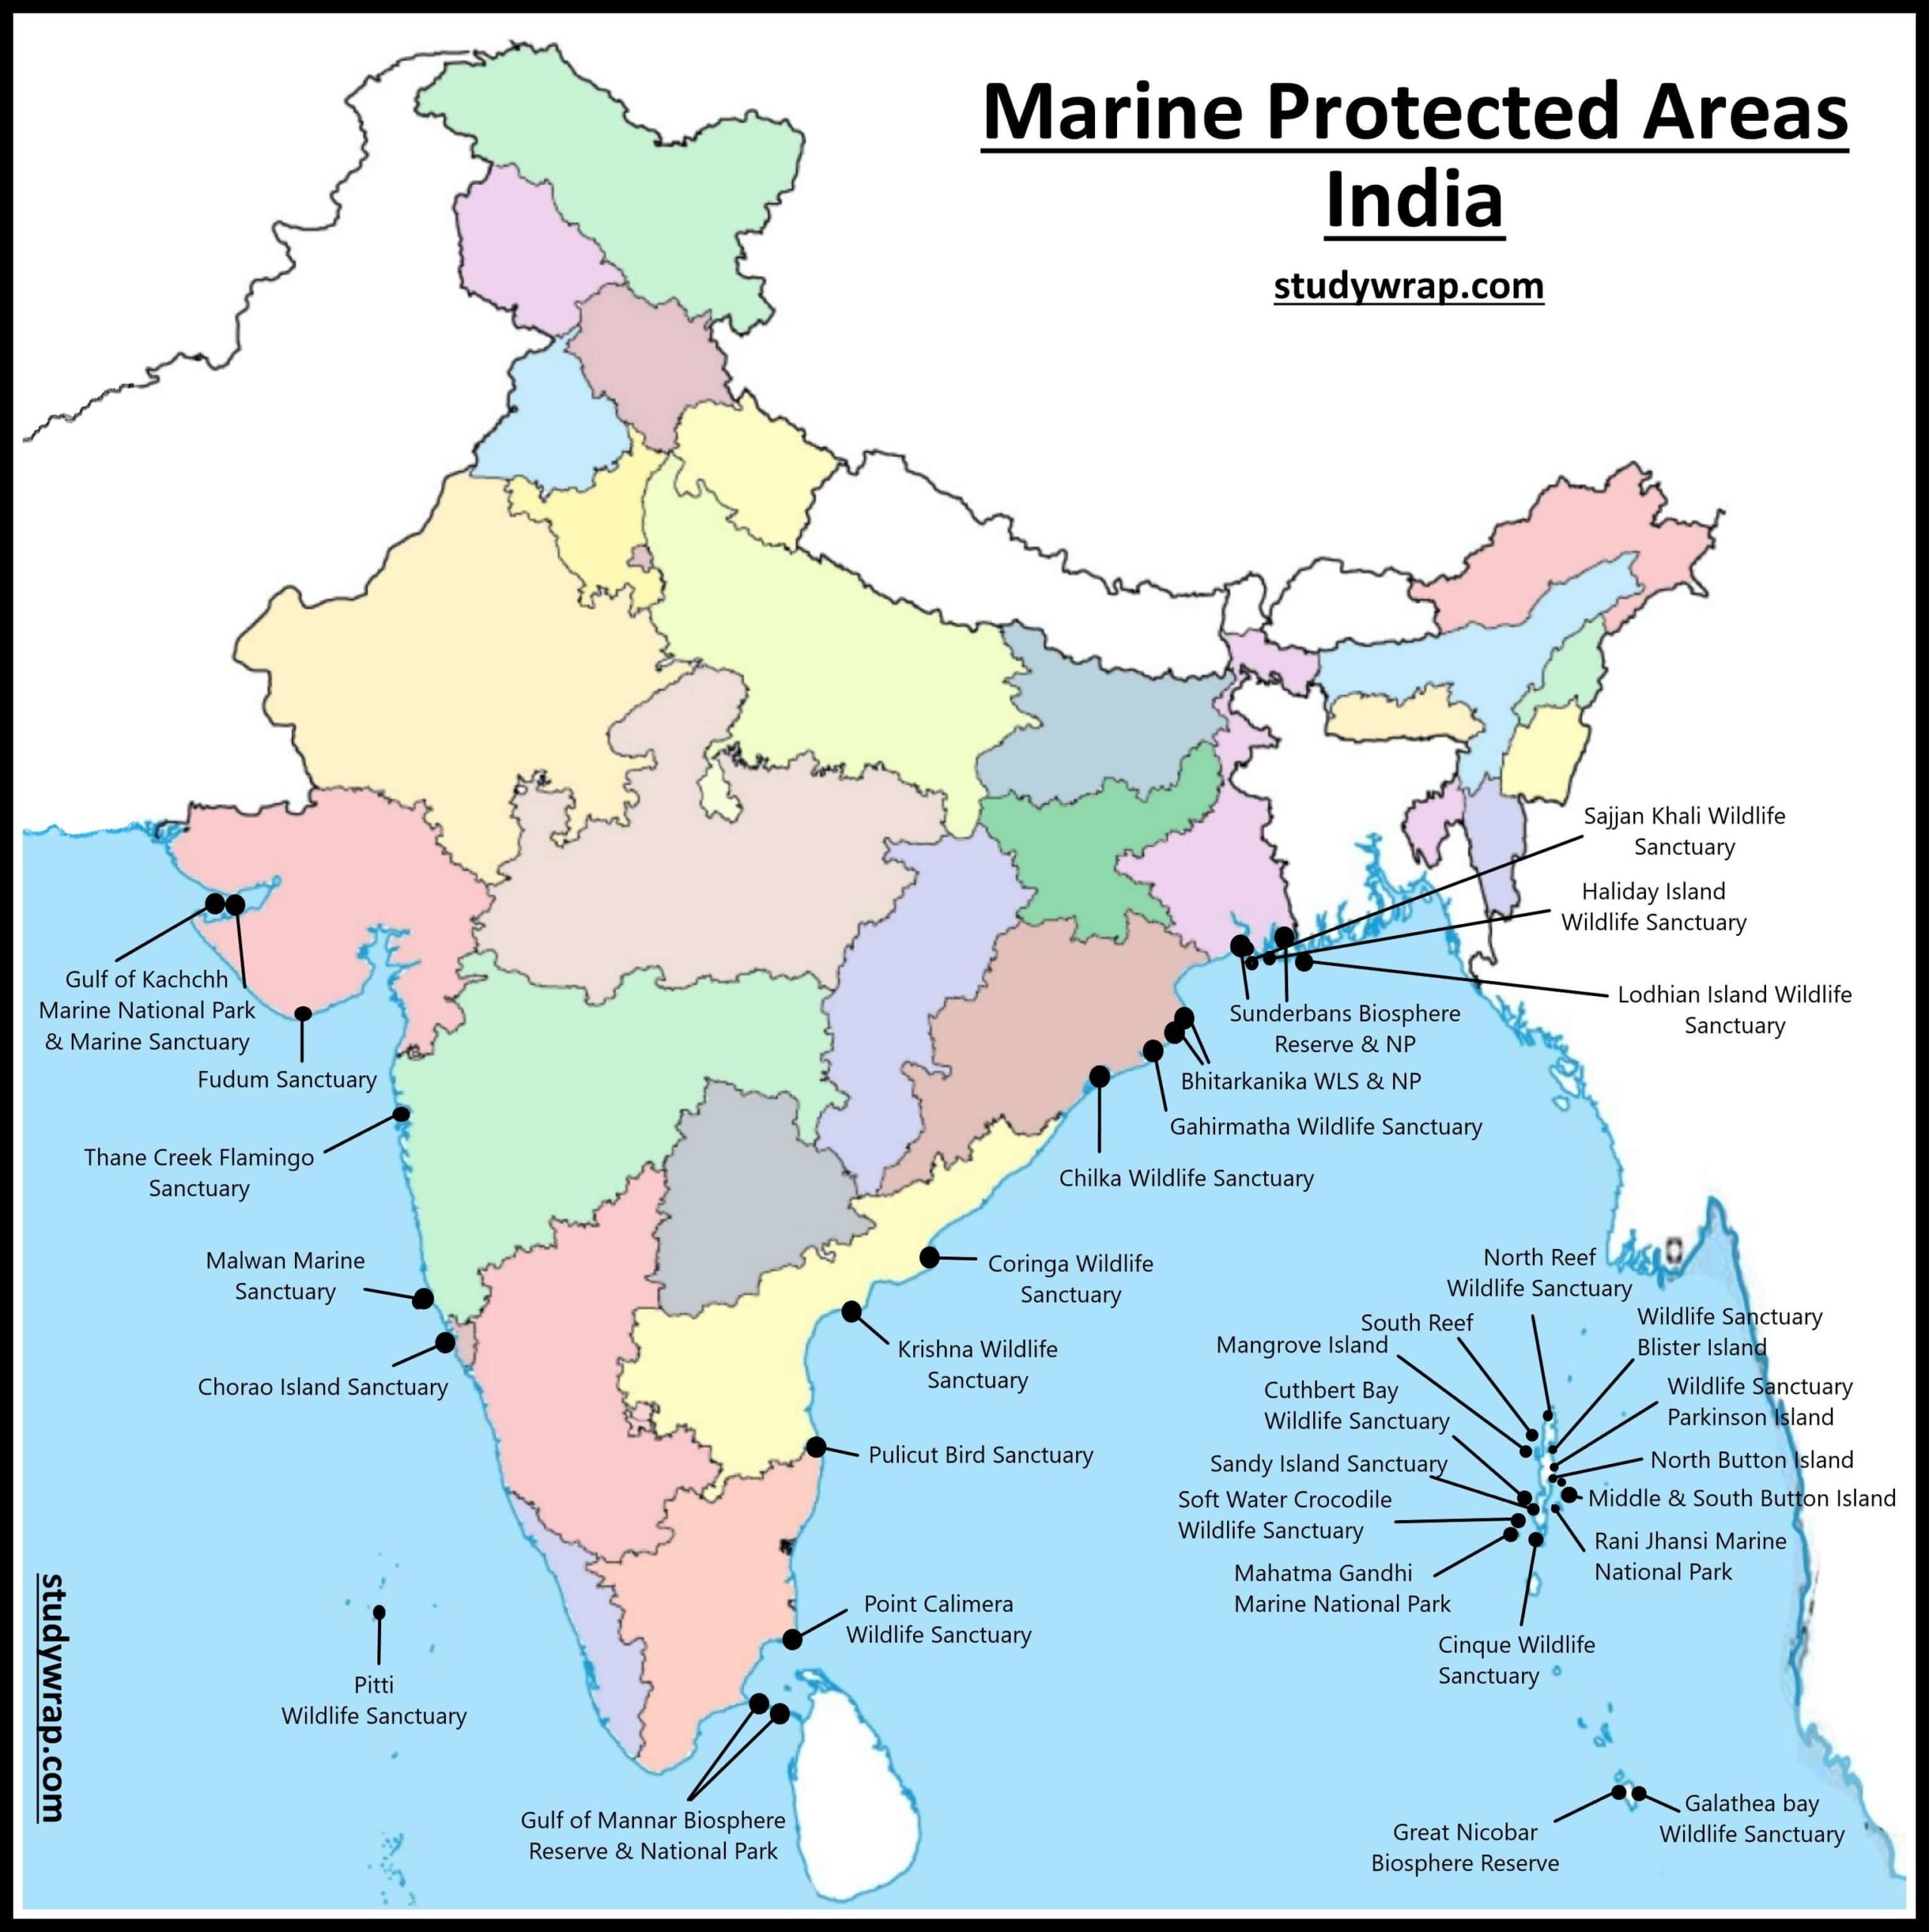 What is Marine Protected Areas?, importance of Marine Protected Areas in India, Complete State-wise List of Marine Protected Areas in India, Marine Protected Areas in India map, studywrap.com